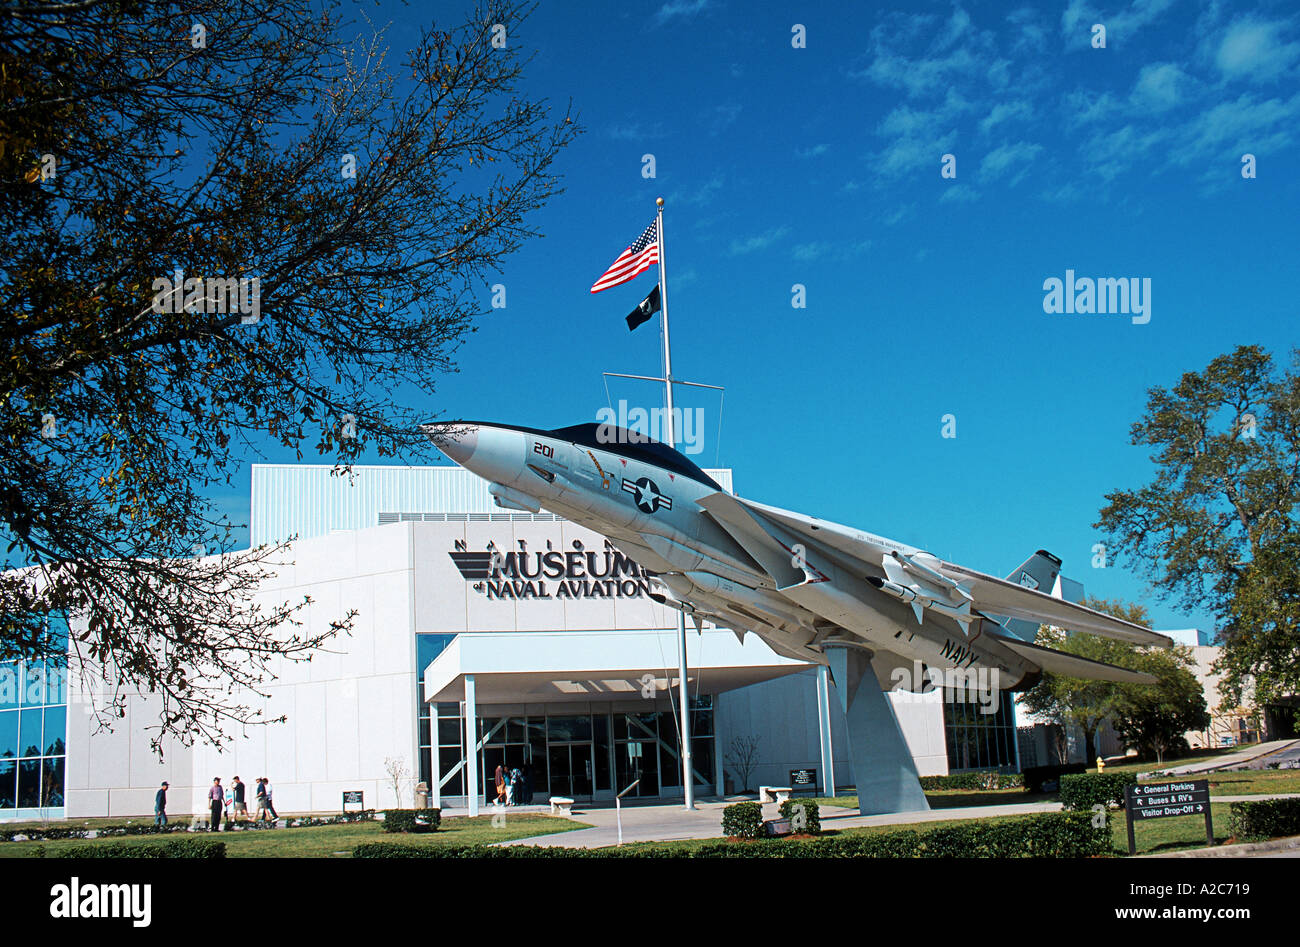 An F 14 Tomcat on display in front of the National Museum of Naval Aviation Pensacola Florida USA Stock Photo